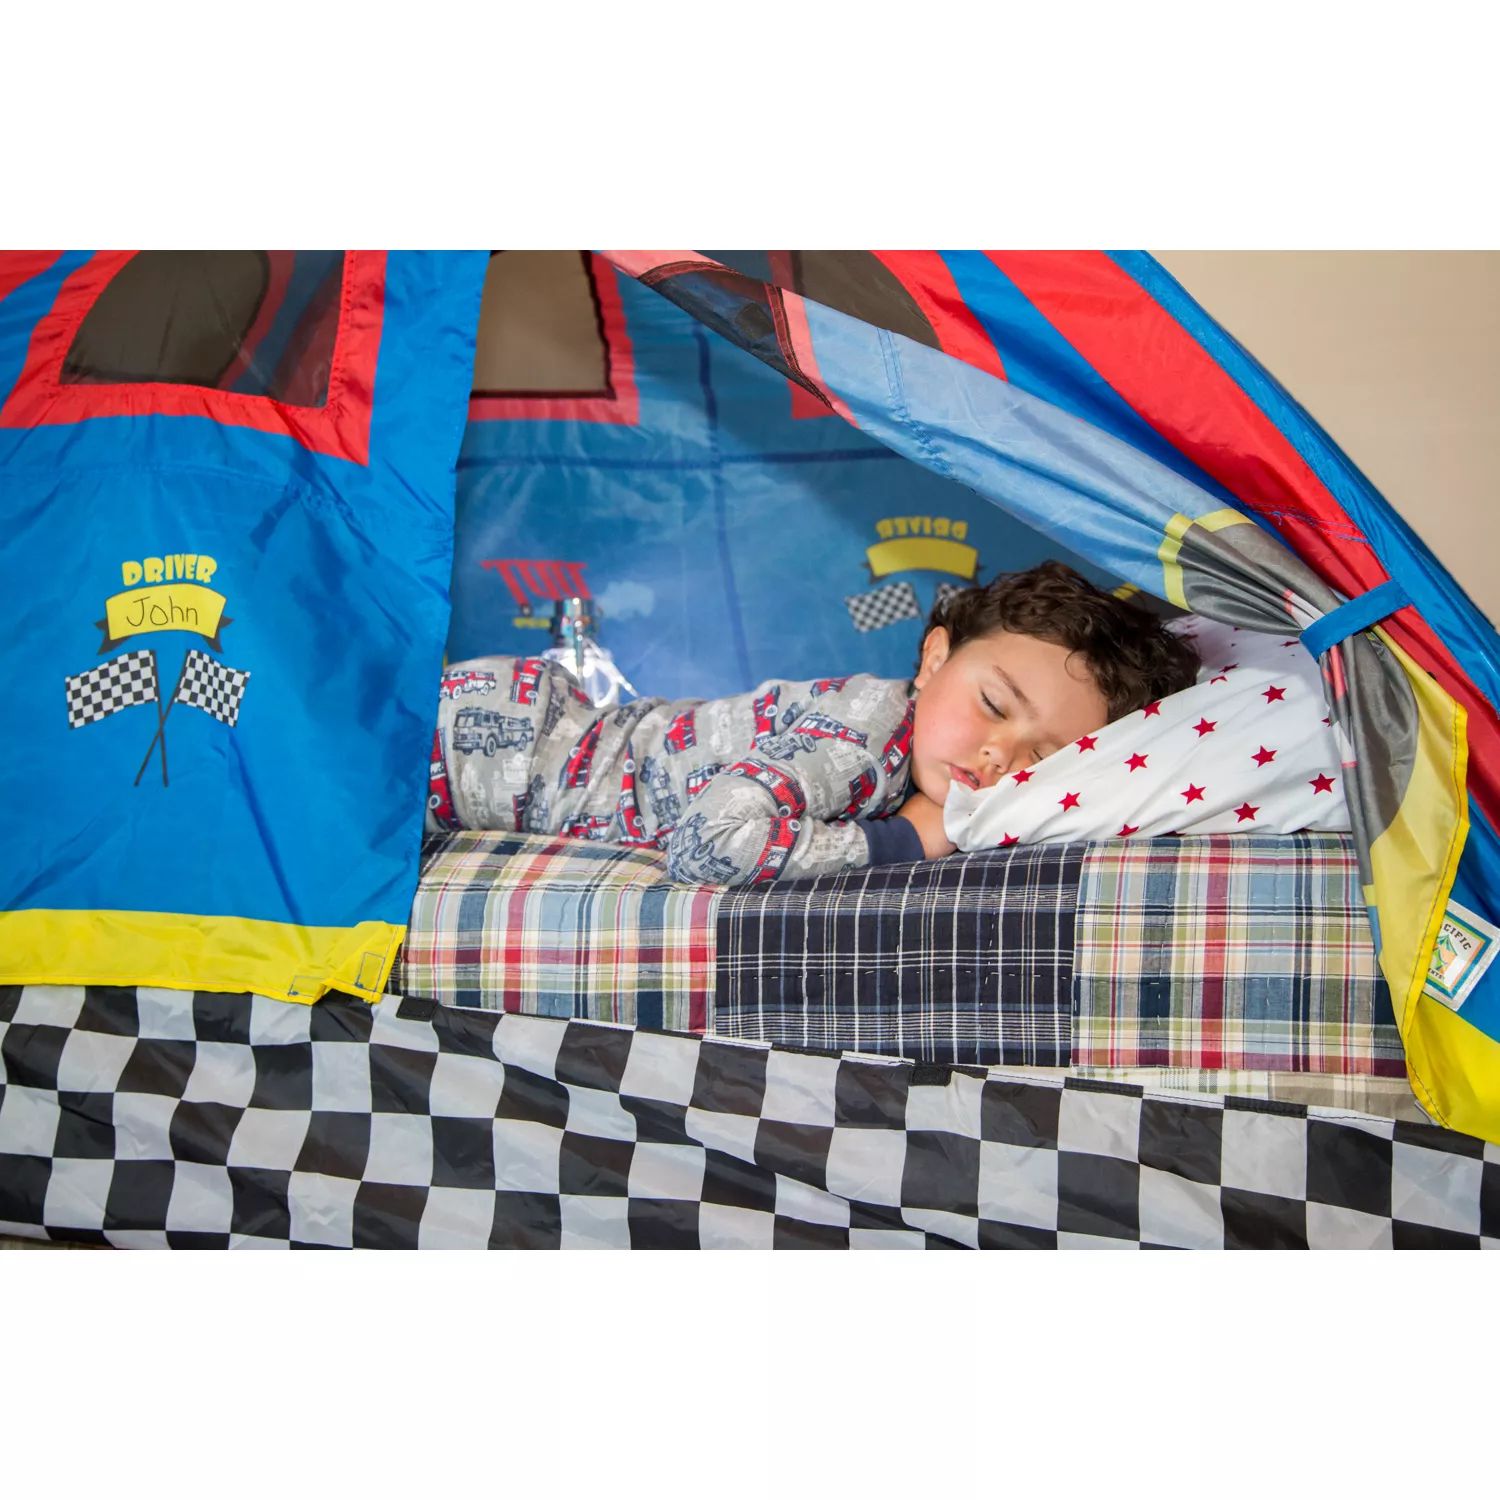 Палатка Pacific Play Tents Red Racer Bed Tent Pacific Play Tents tent feet corner center connector tent connector parts spare parts tents connector parts tent outdoor camping tents accessories